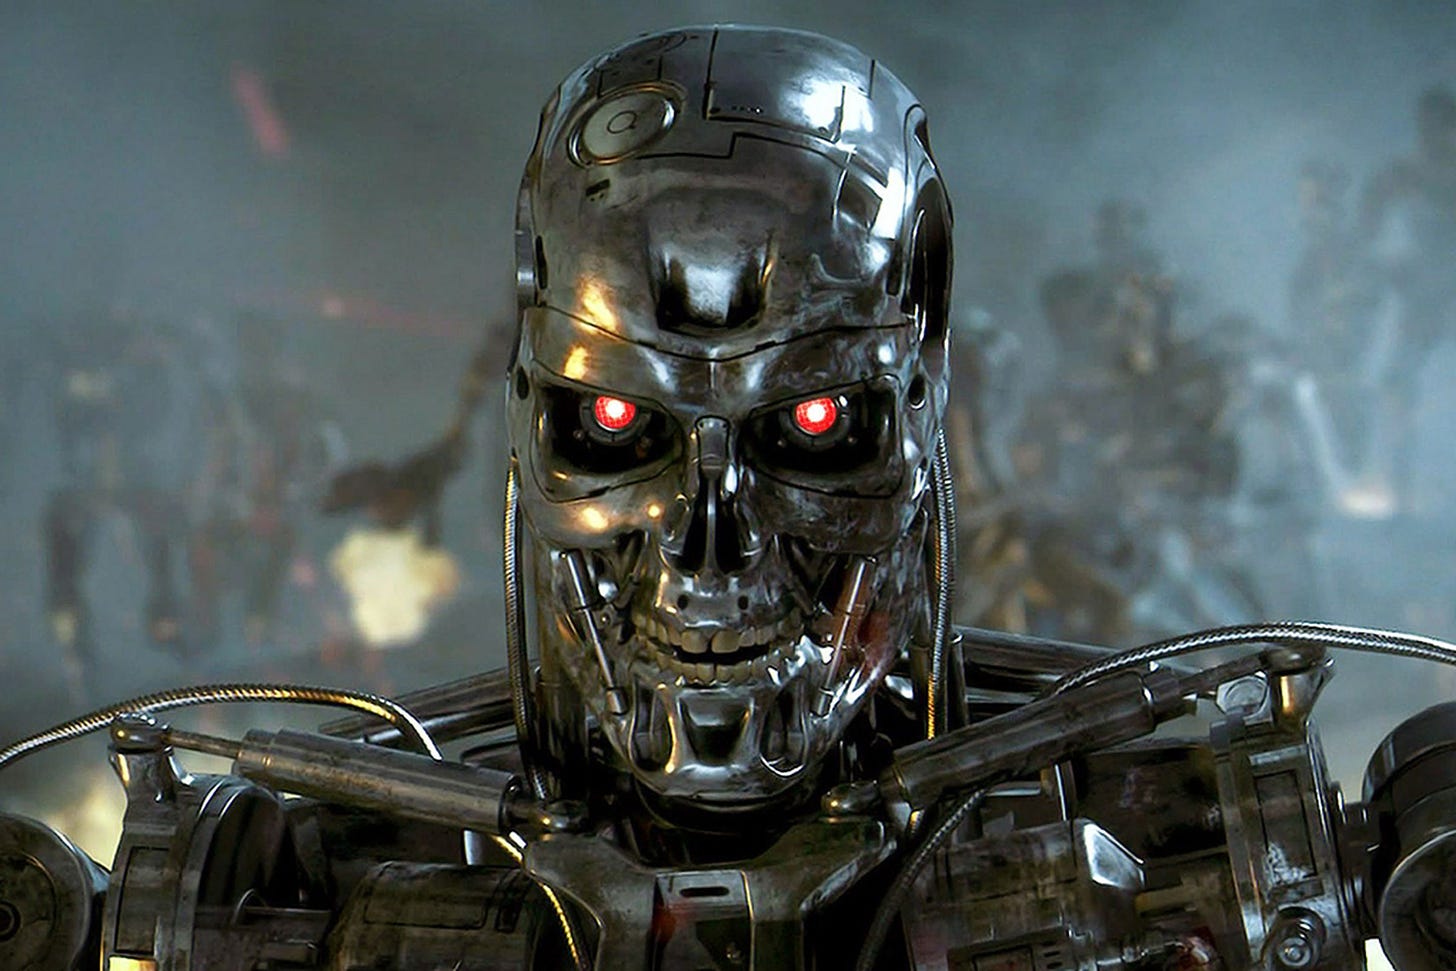 Terminator will return in 2019 with the help of James Cameron - The Verge